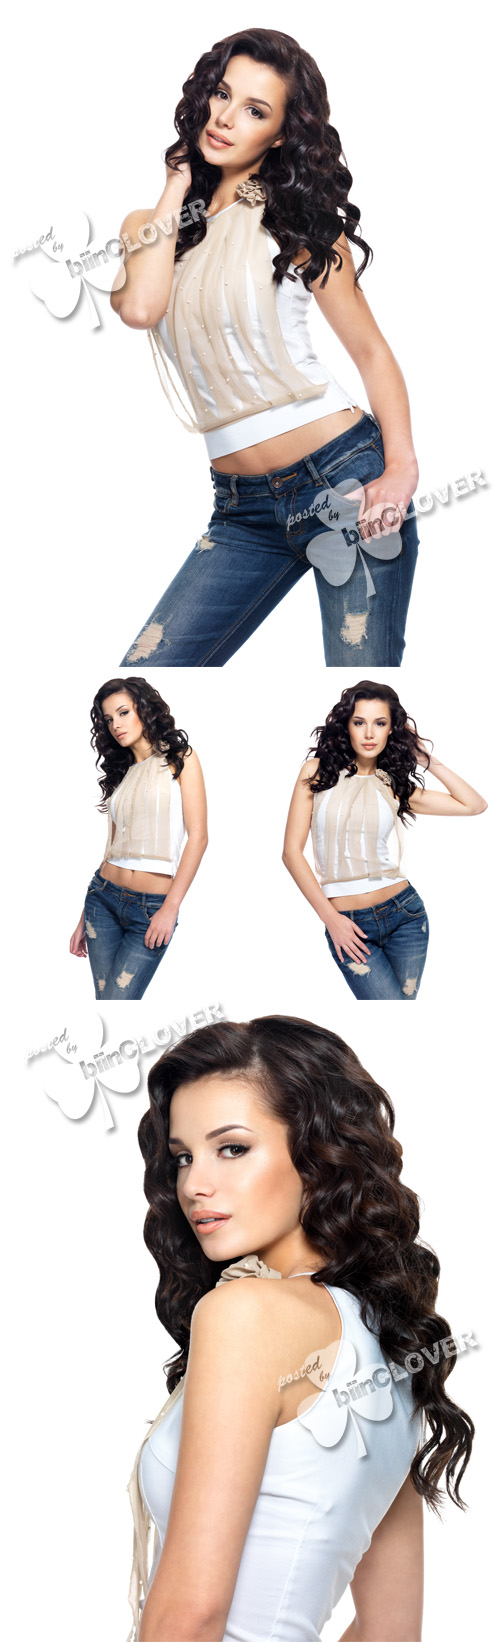 Young woman in blue jeans 0325